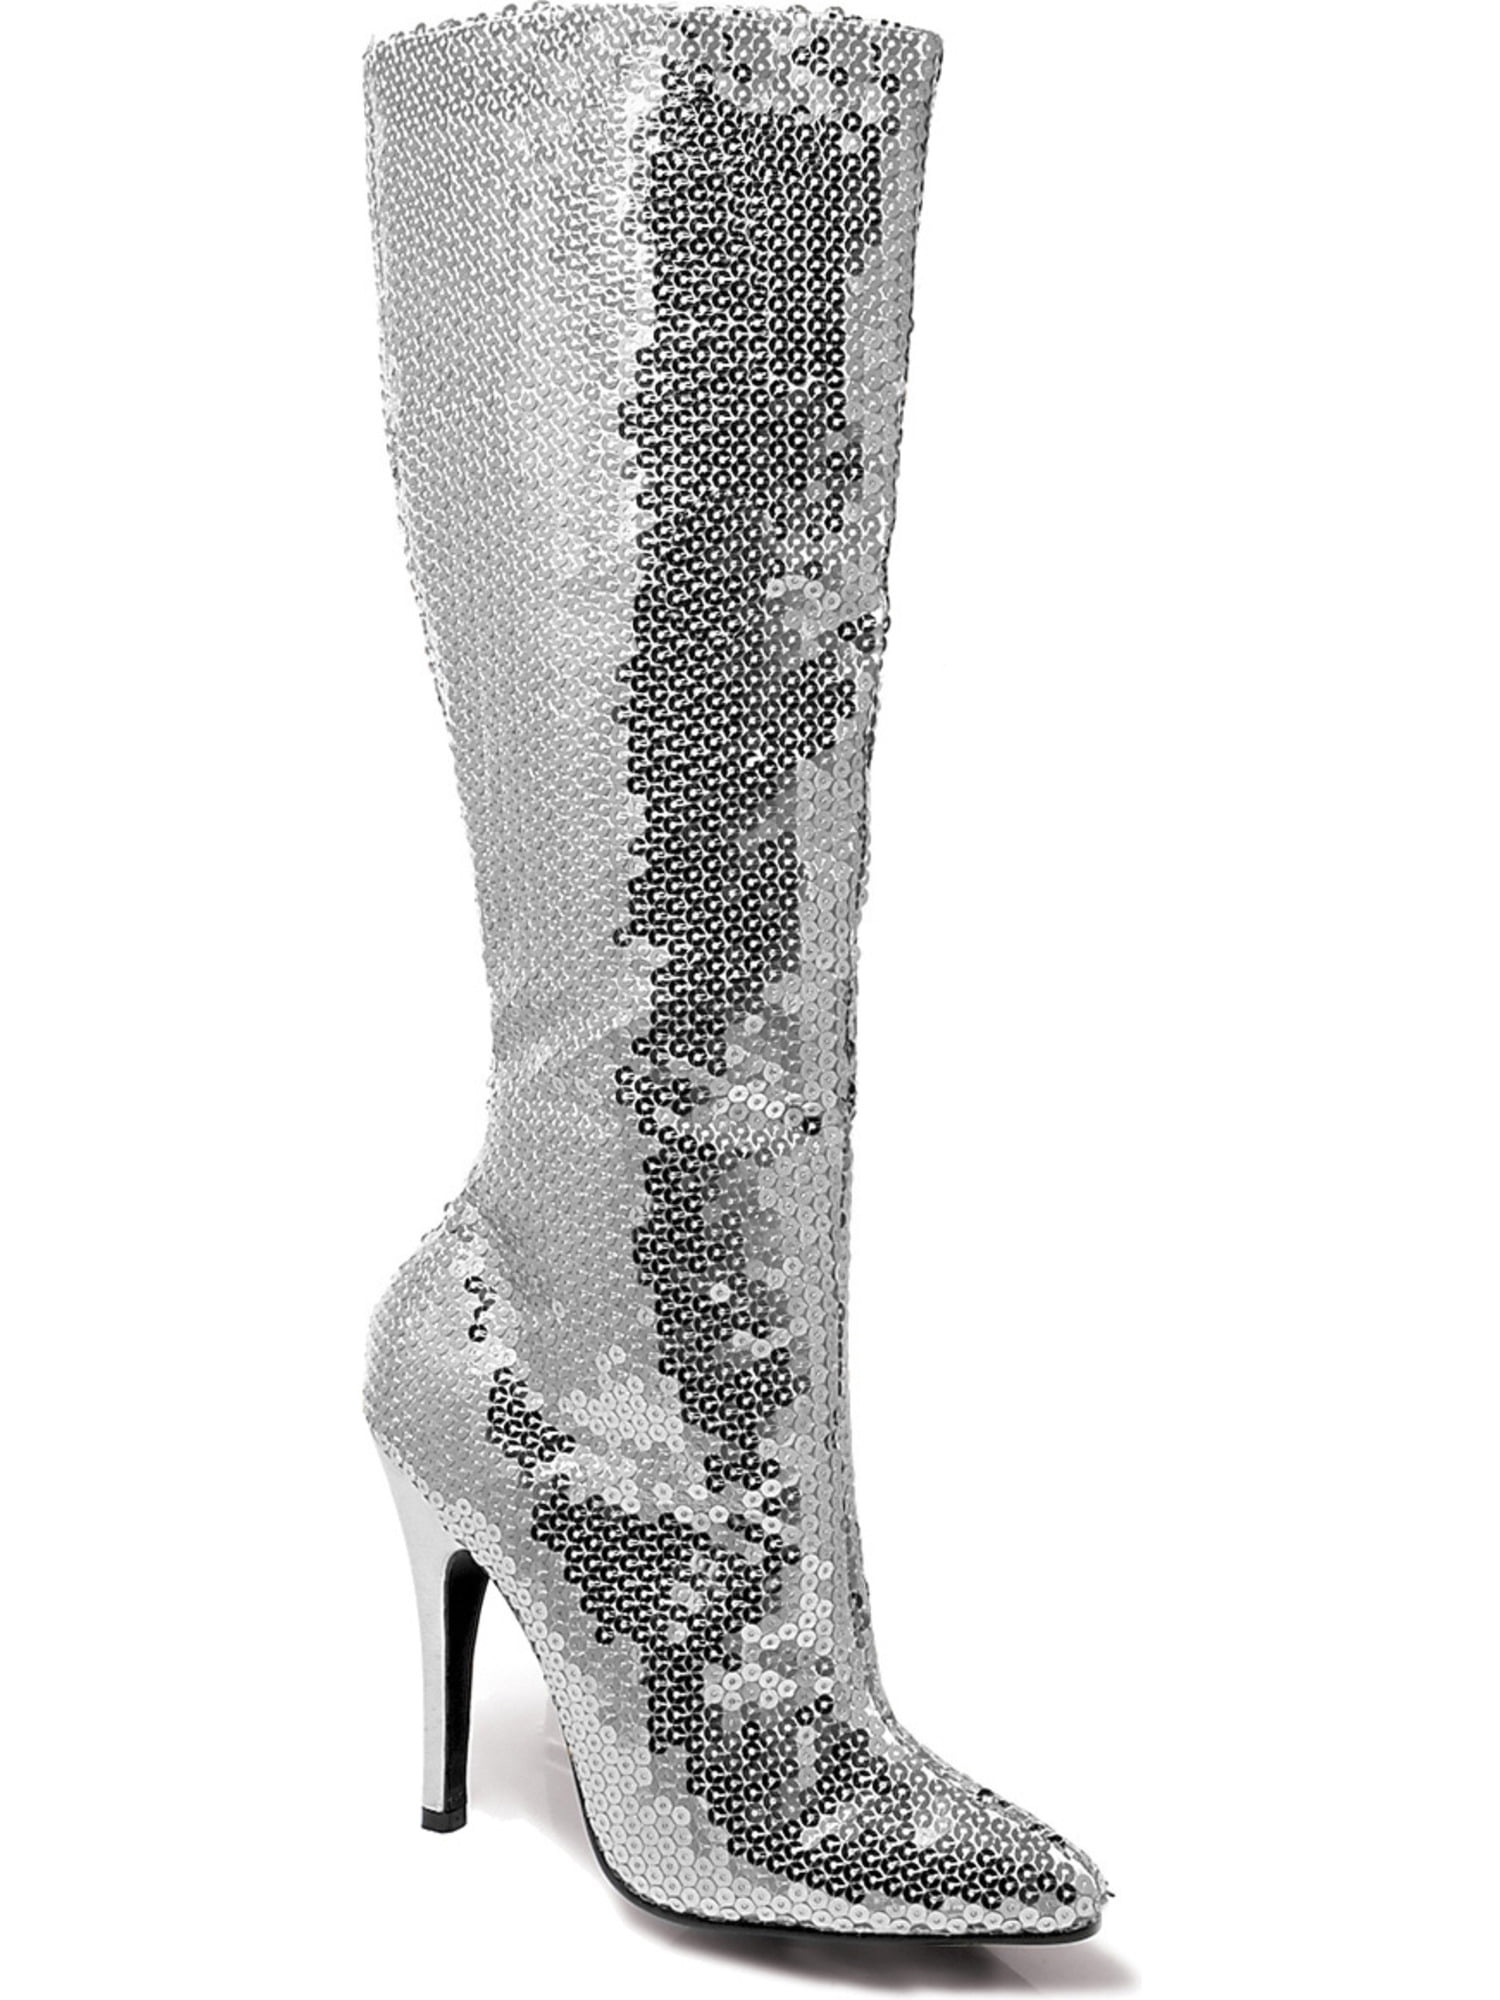 knee high silver boots